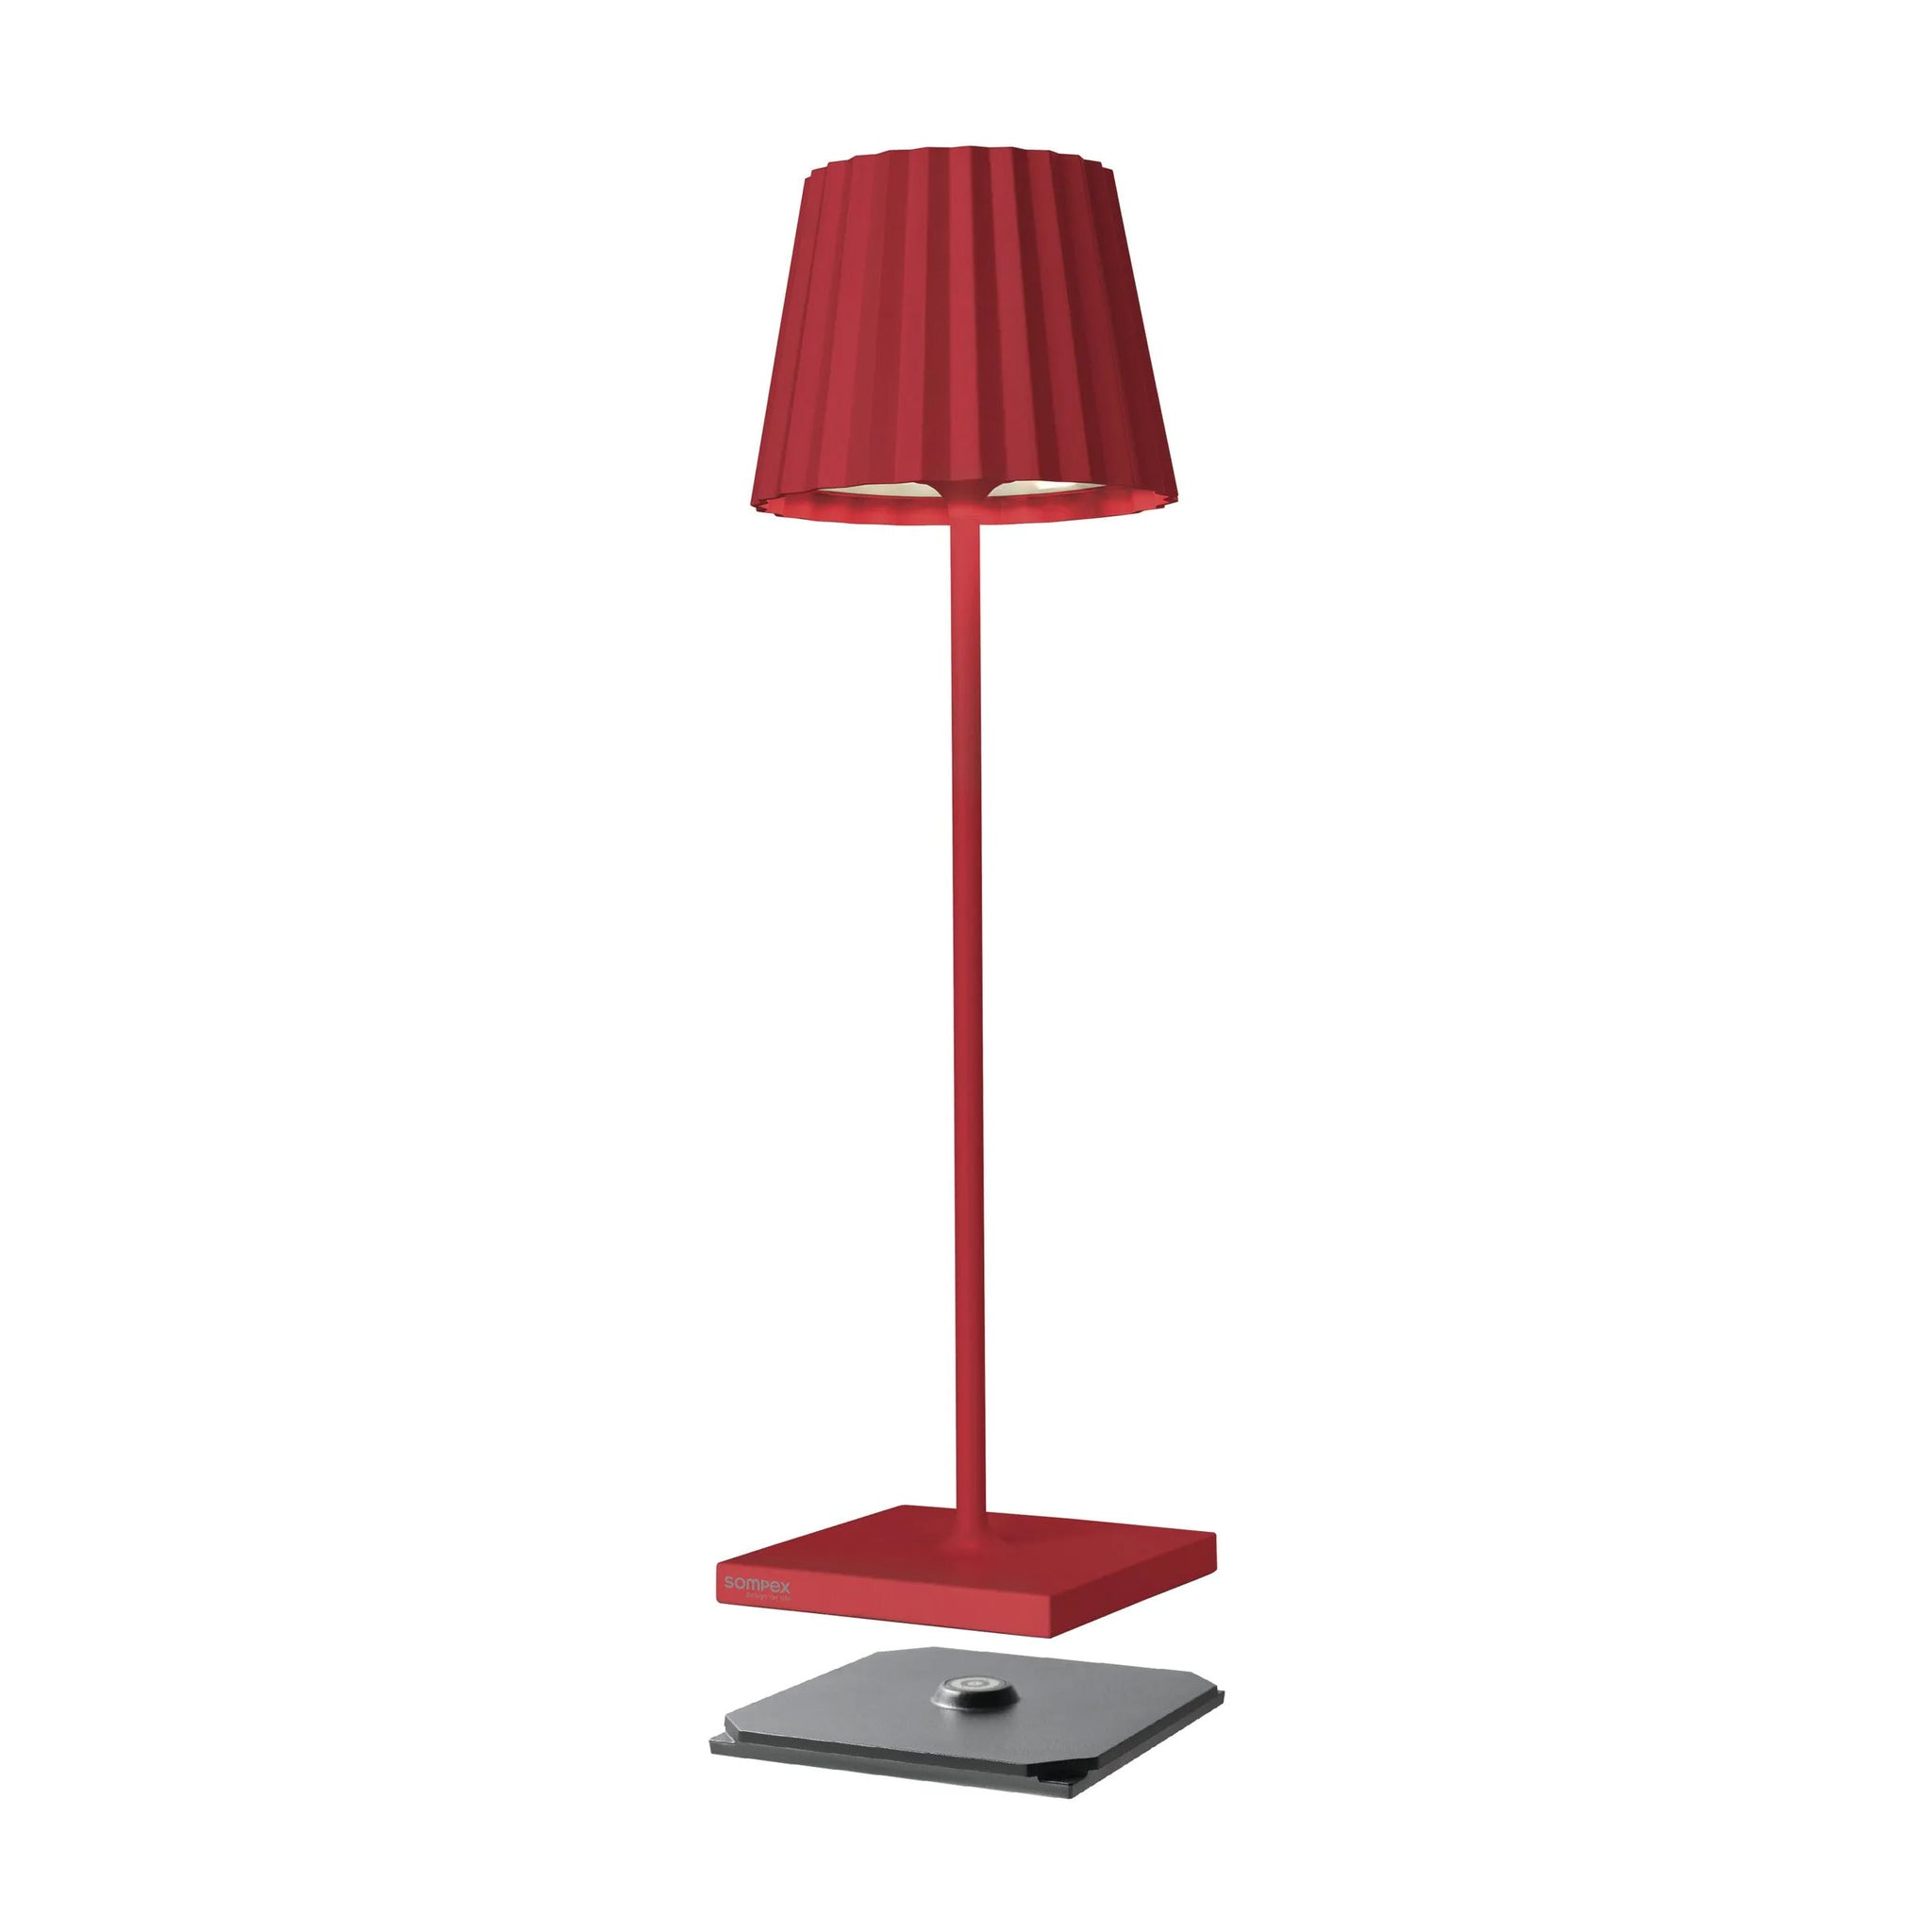 Sompex Troll 2.0 Rood│Buitenverlichting│art. 78181│zwvend boven oplaadstation